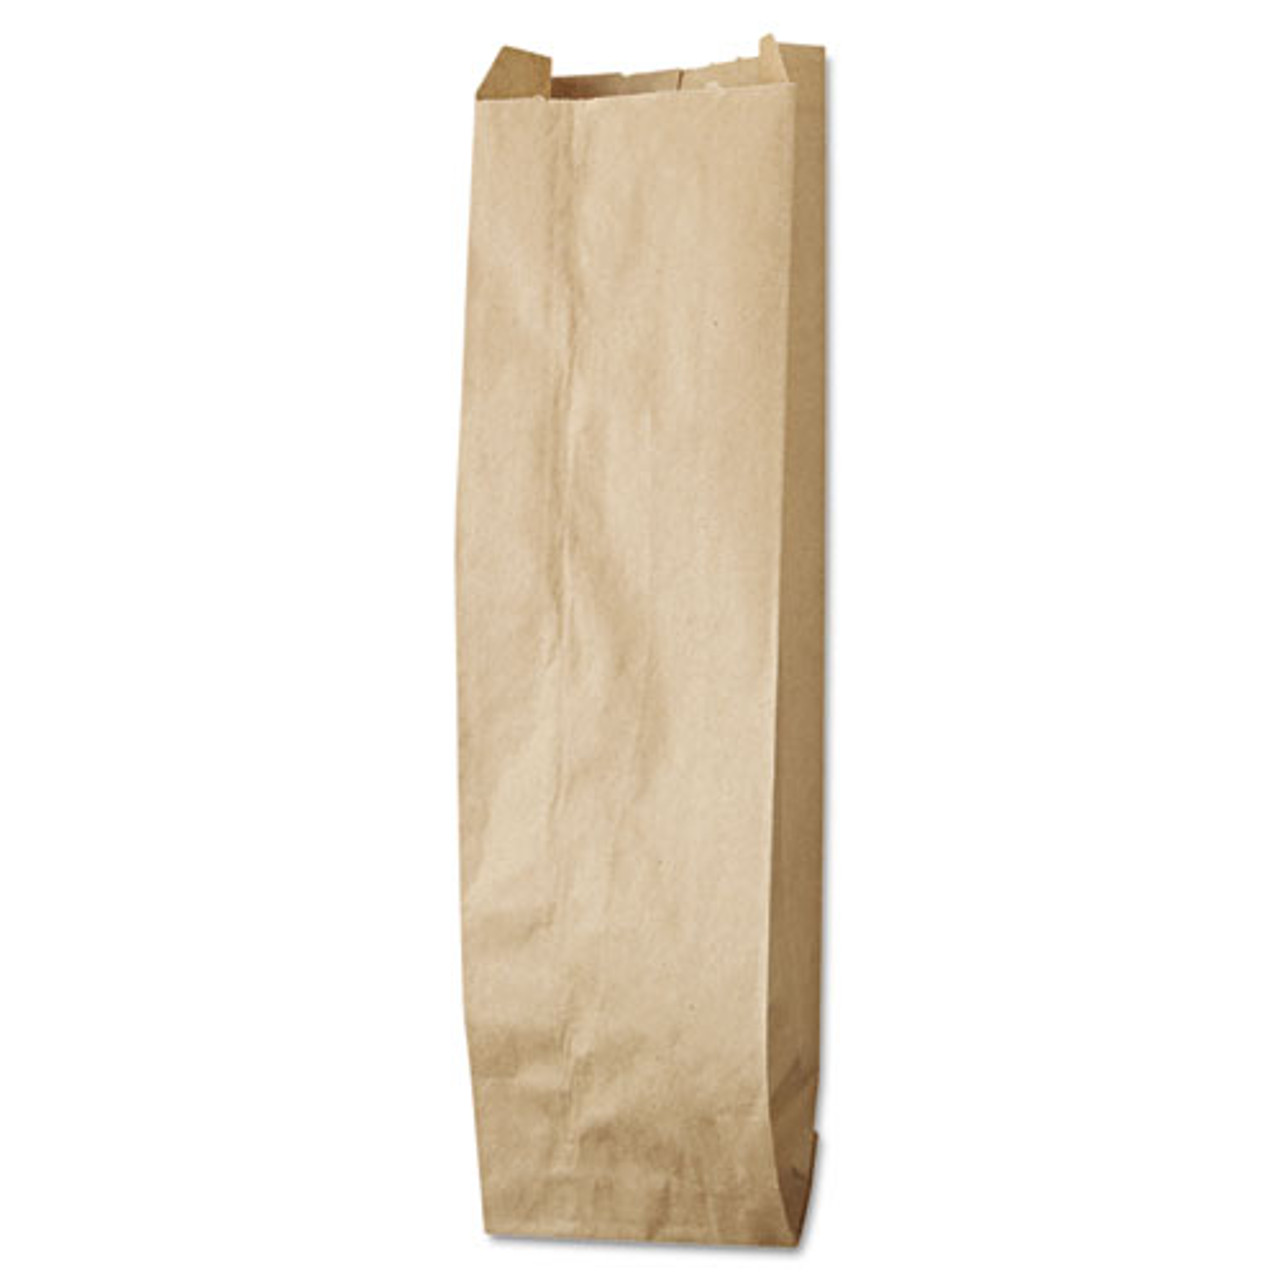 General Grocery Paper Bags, 35 lbs. Capacity, #8, 6.13W x 4.17D